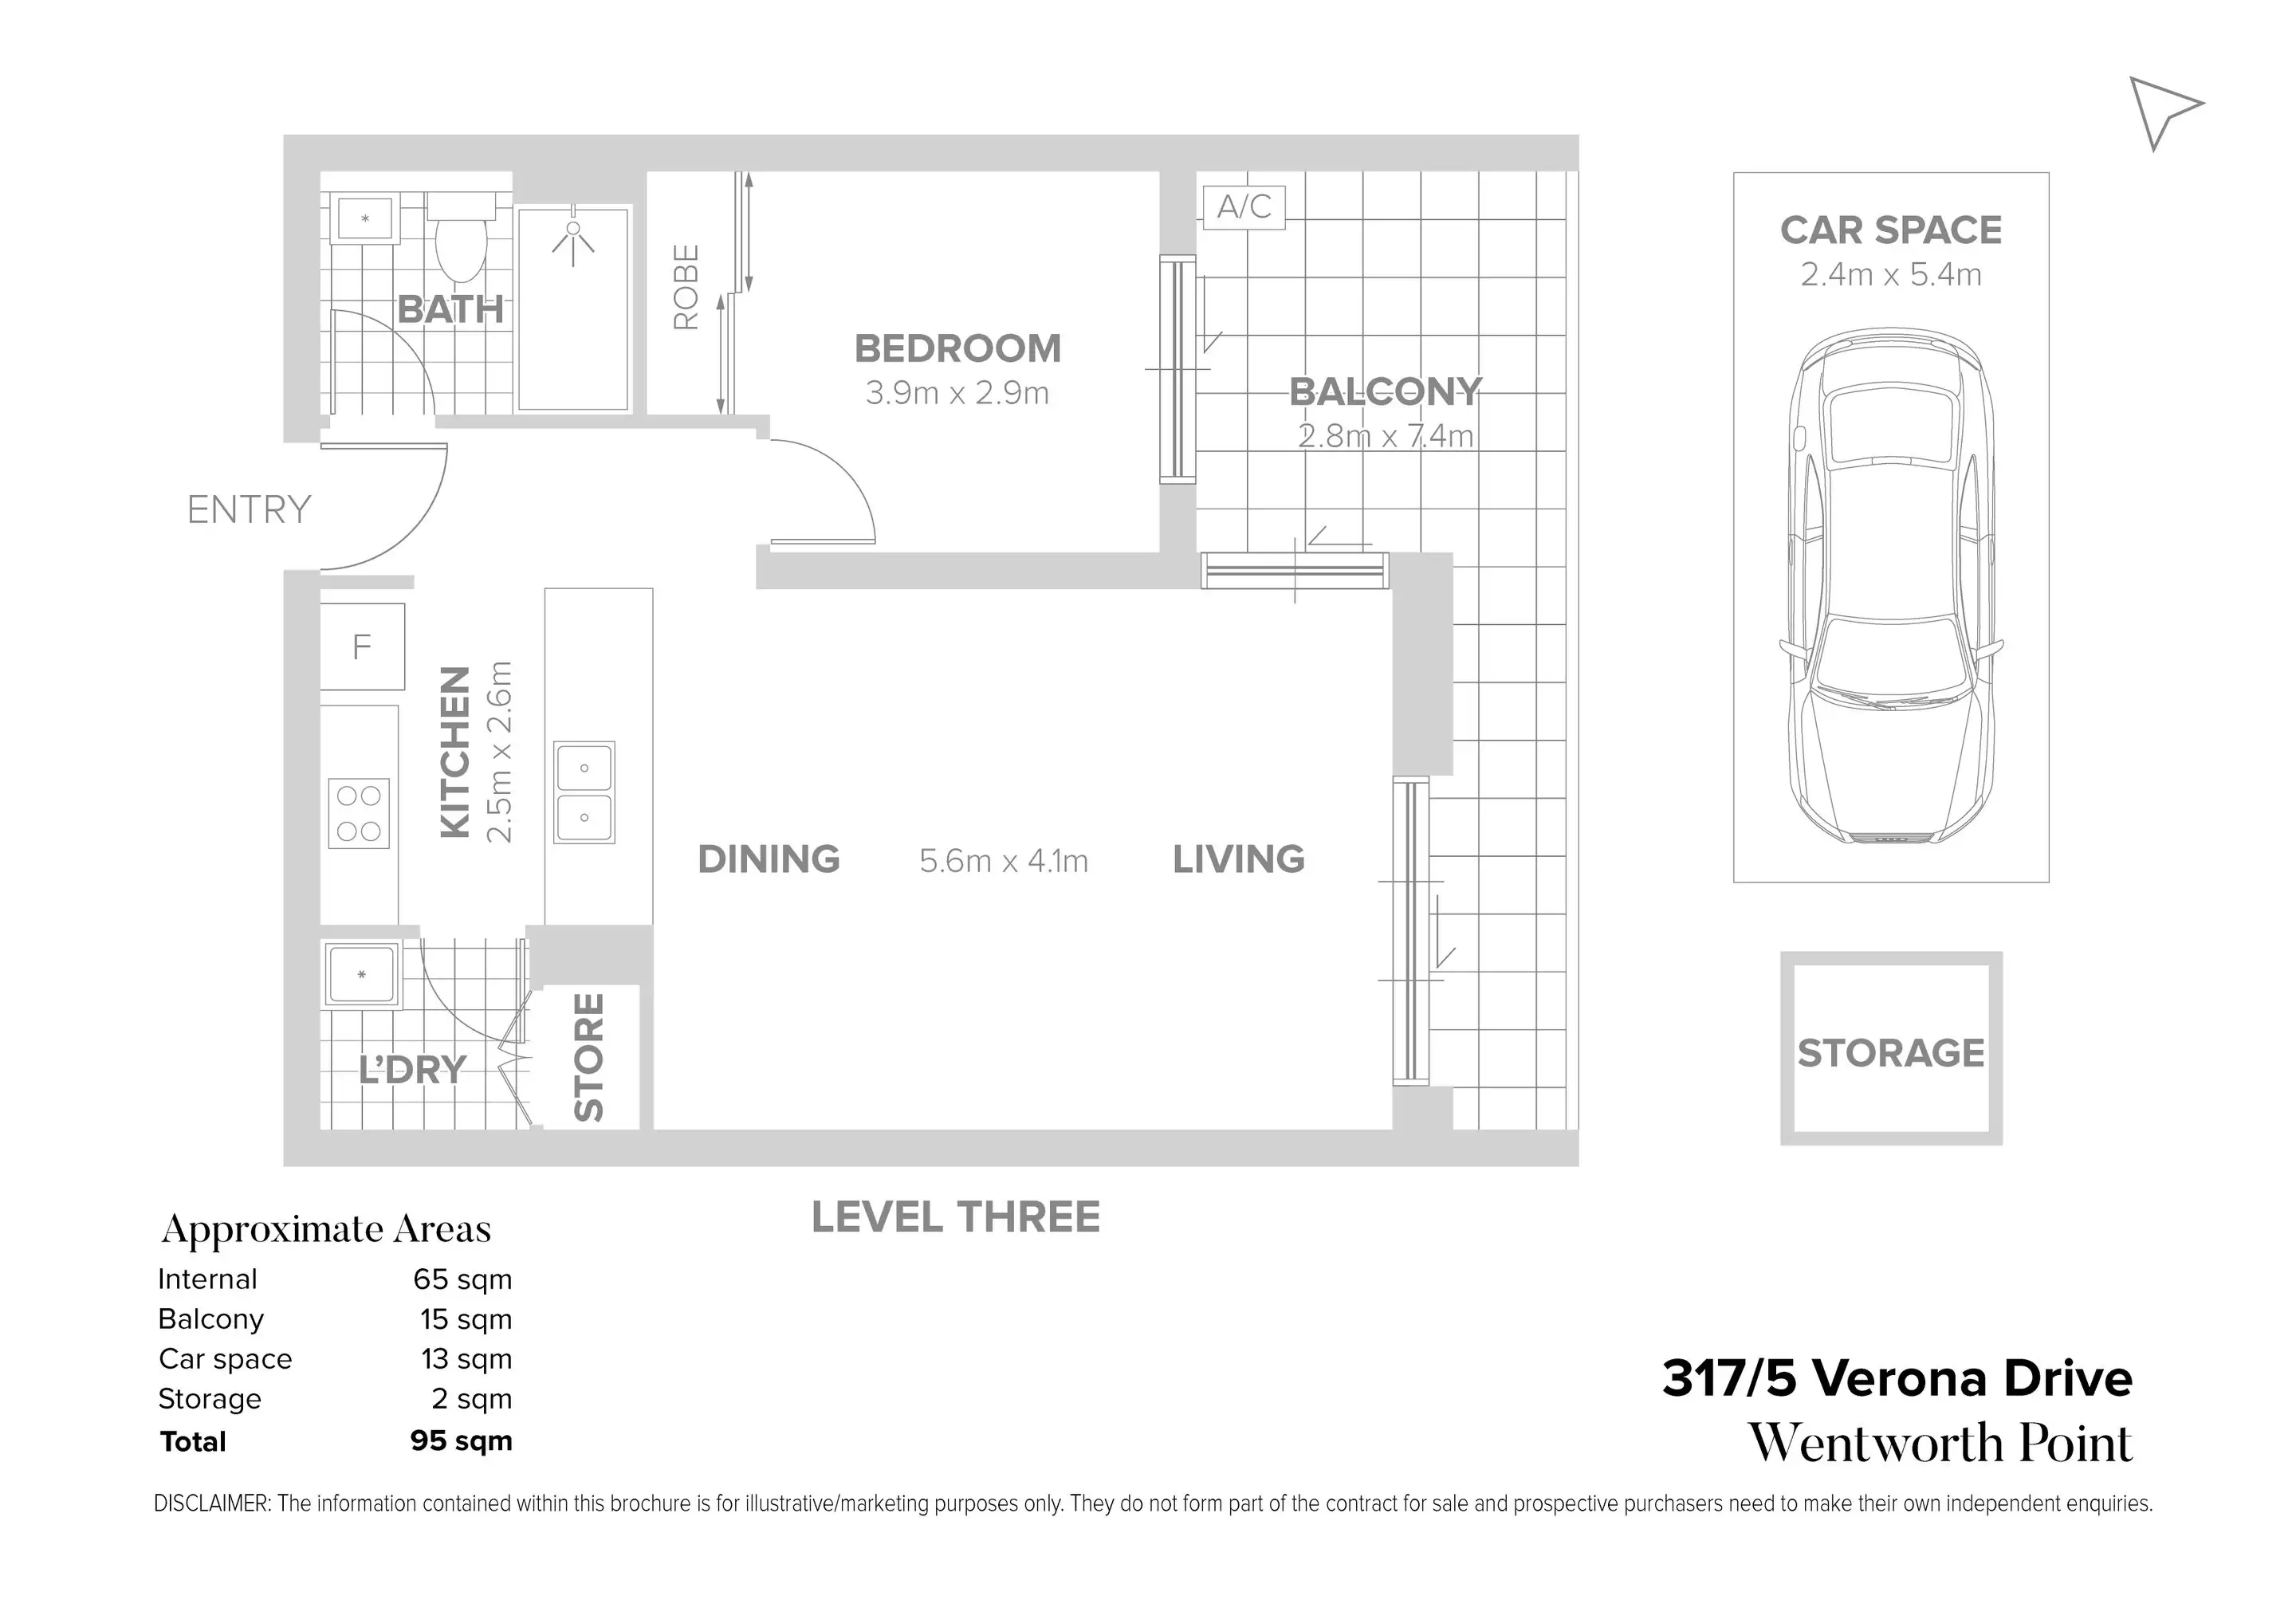 317/5 Verona Drive, Wentworth Point Sold by Chidiac Realty - floorplan